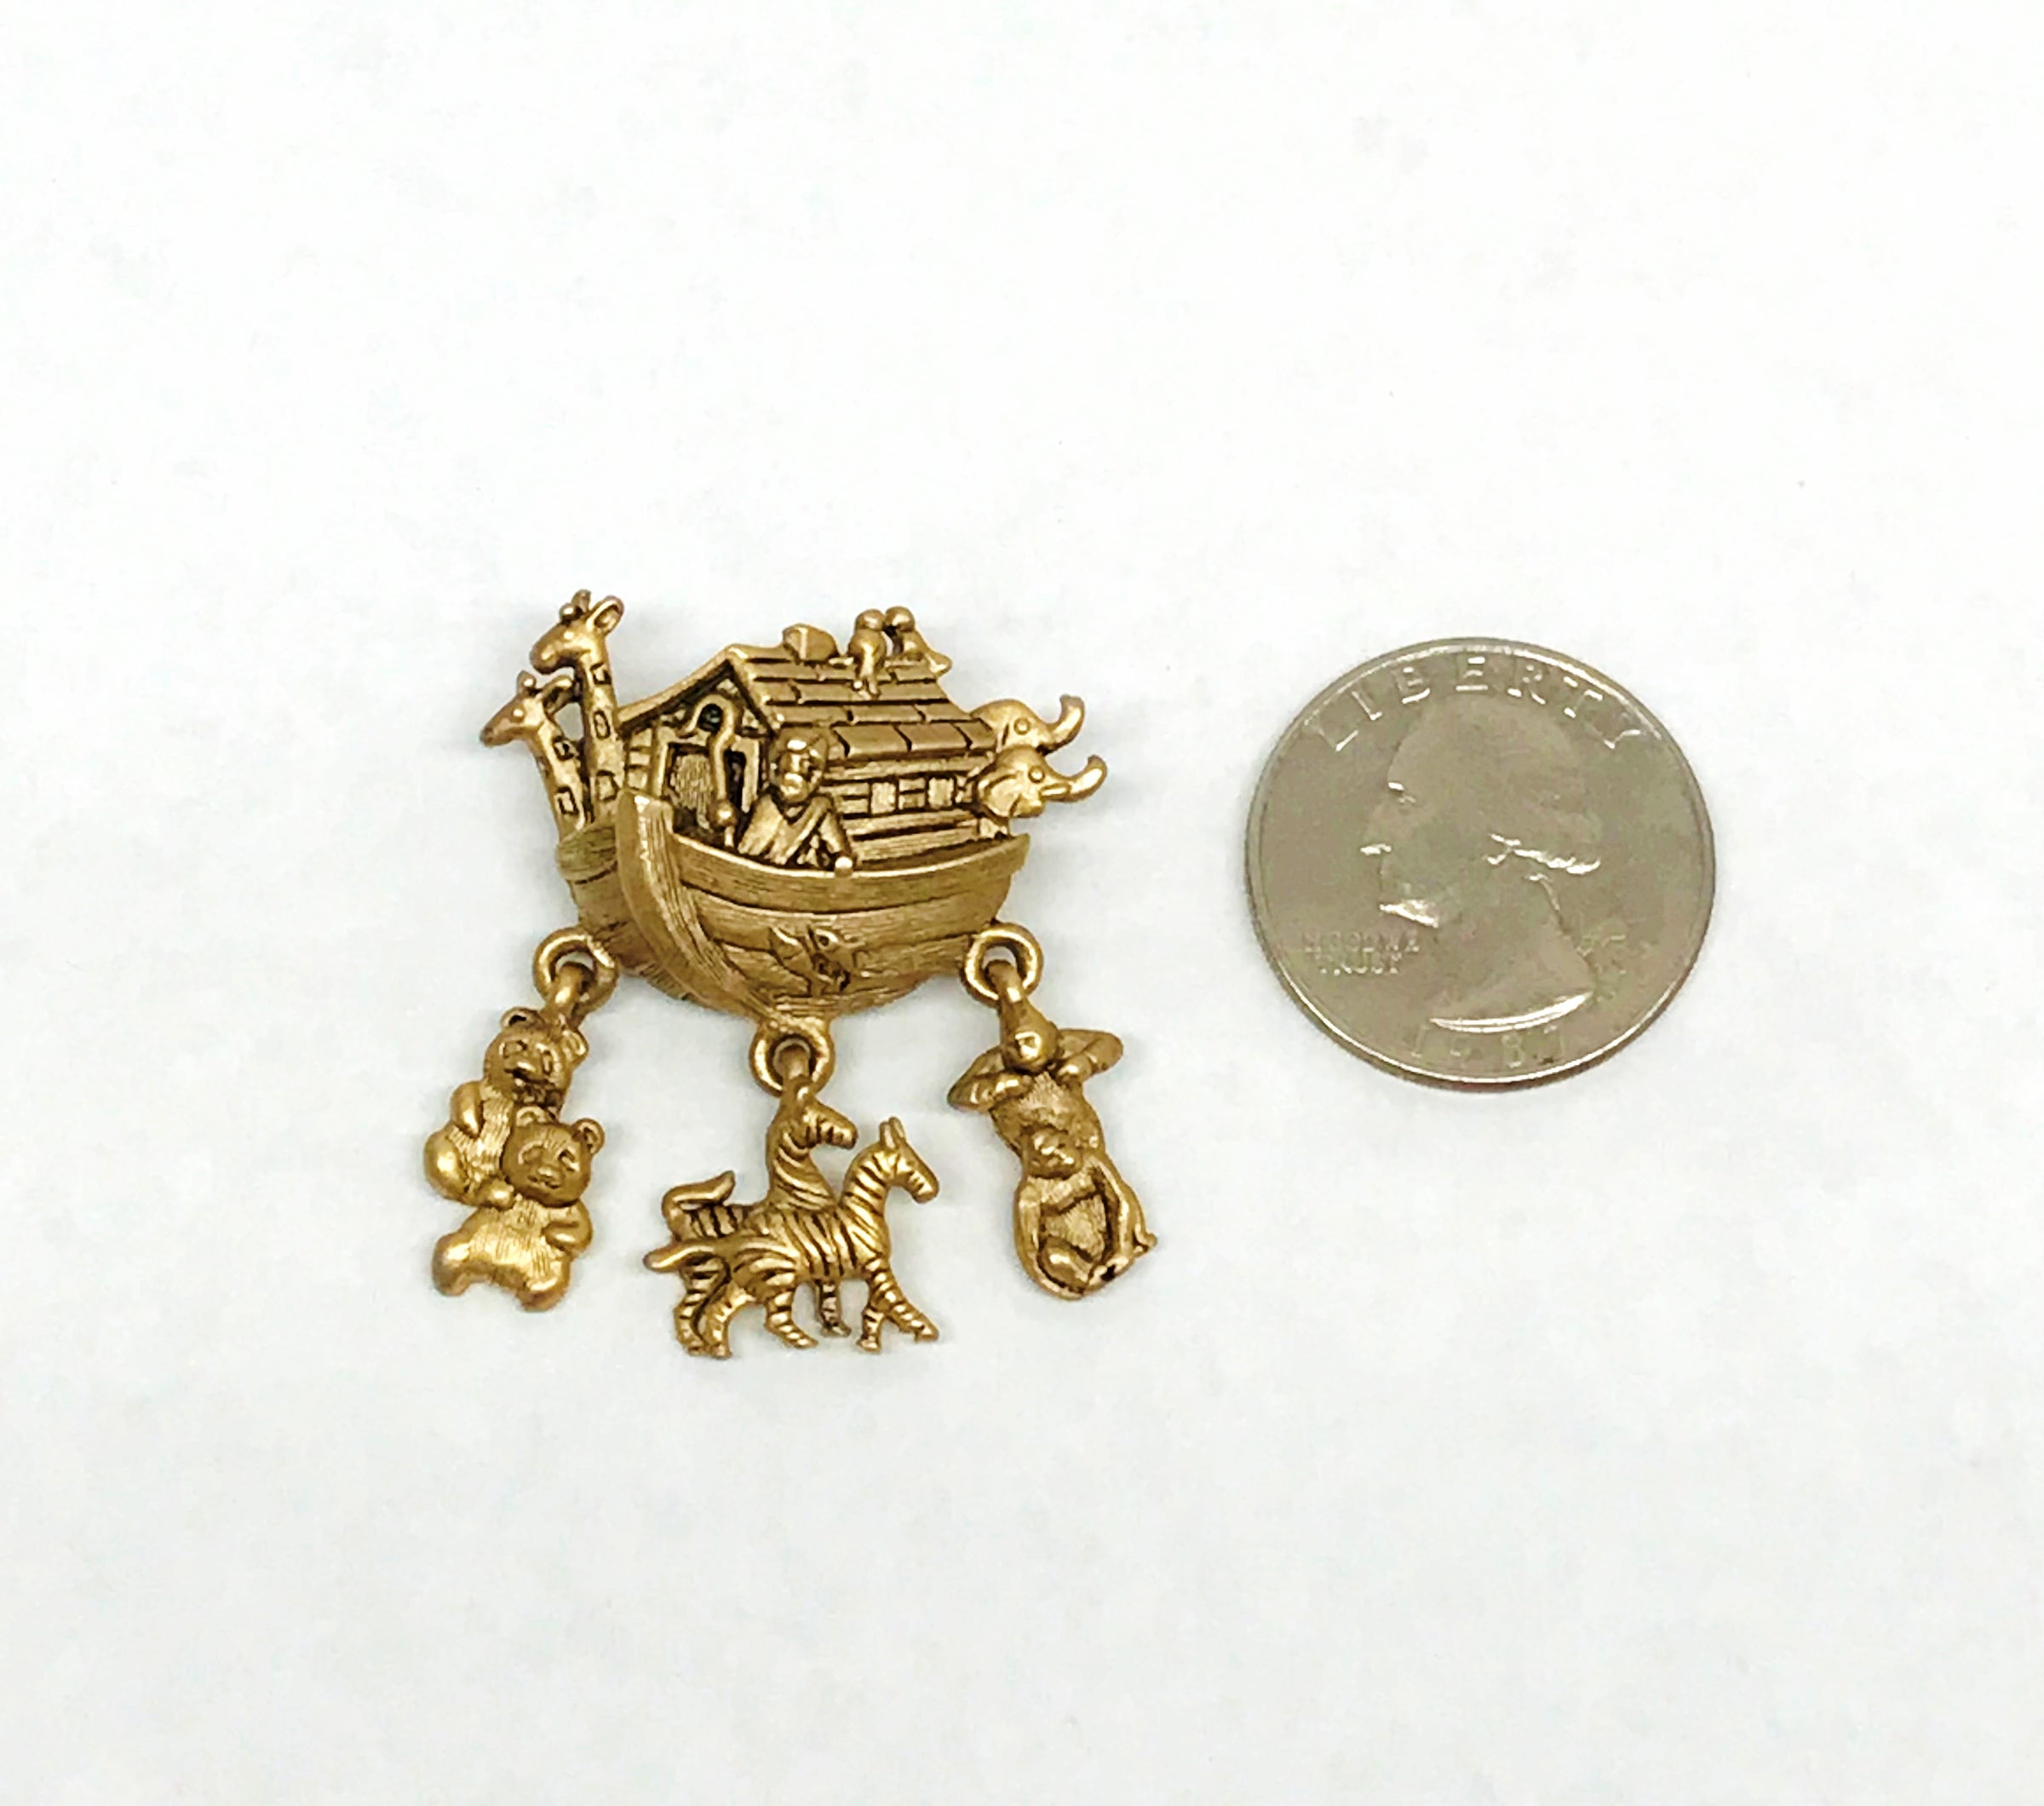 www.hersandhistreasures.com/products/avon-noahs-ark-bronze-tone-brooch-pin-with-dangling-charms